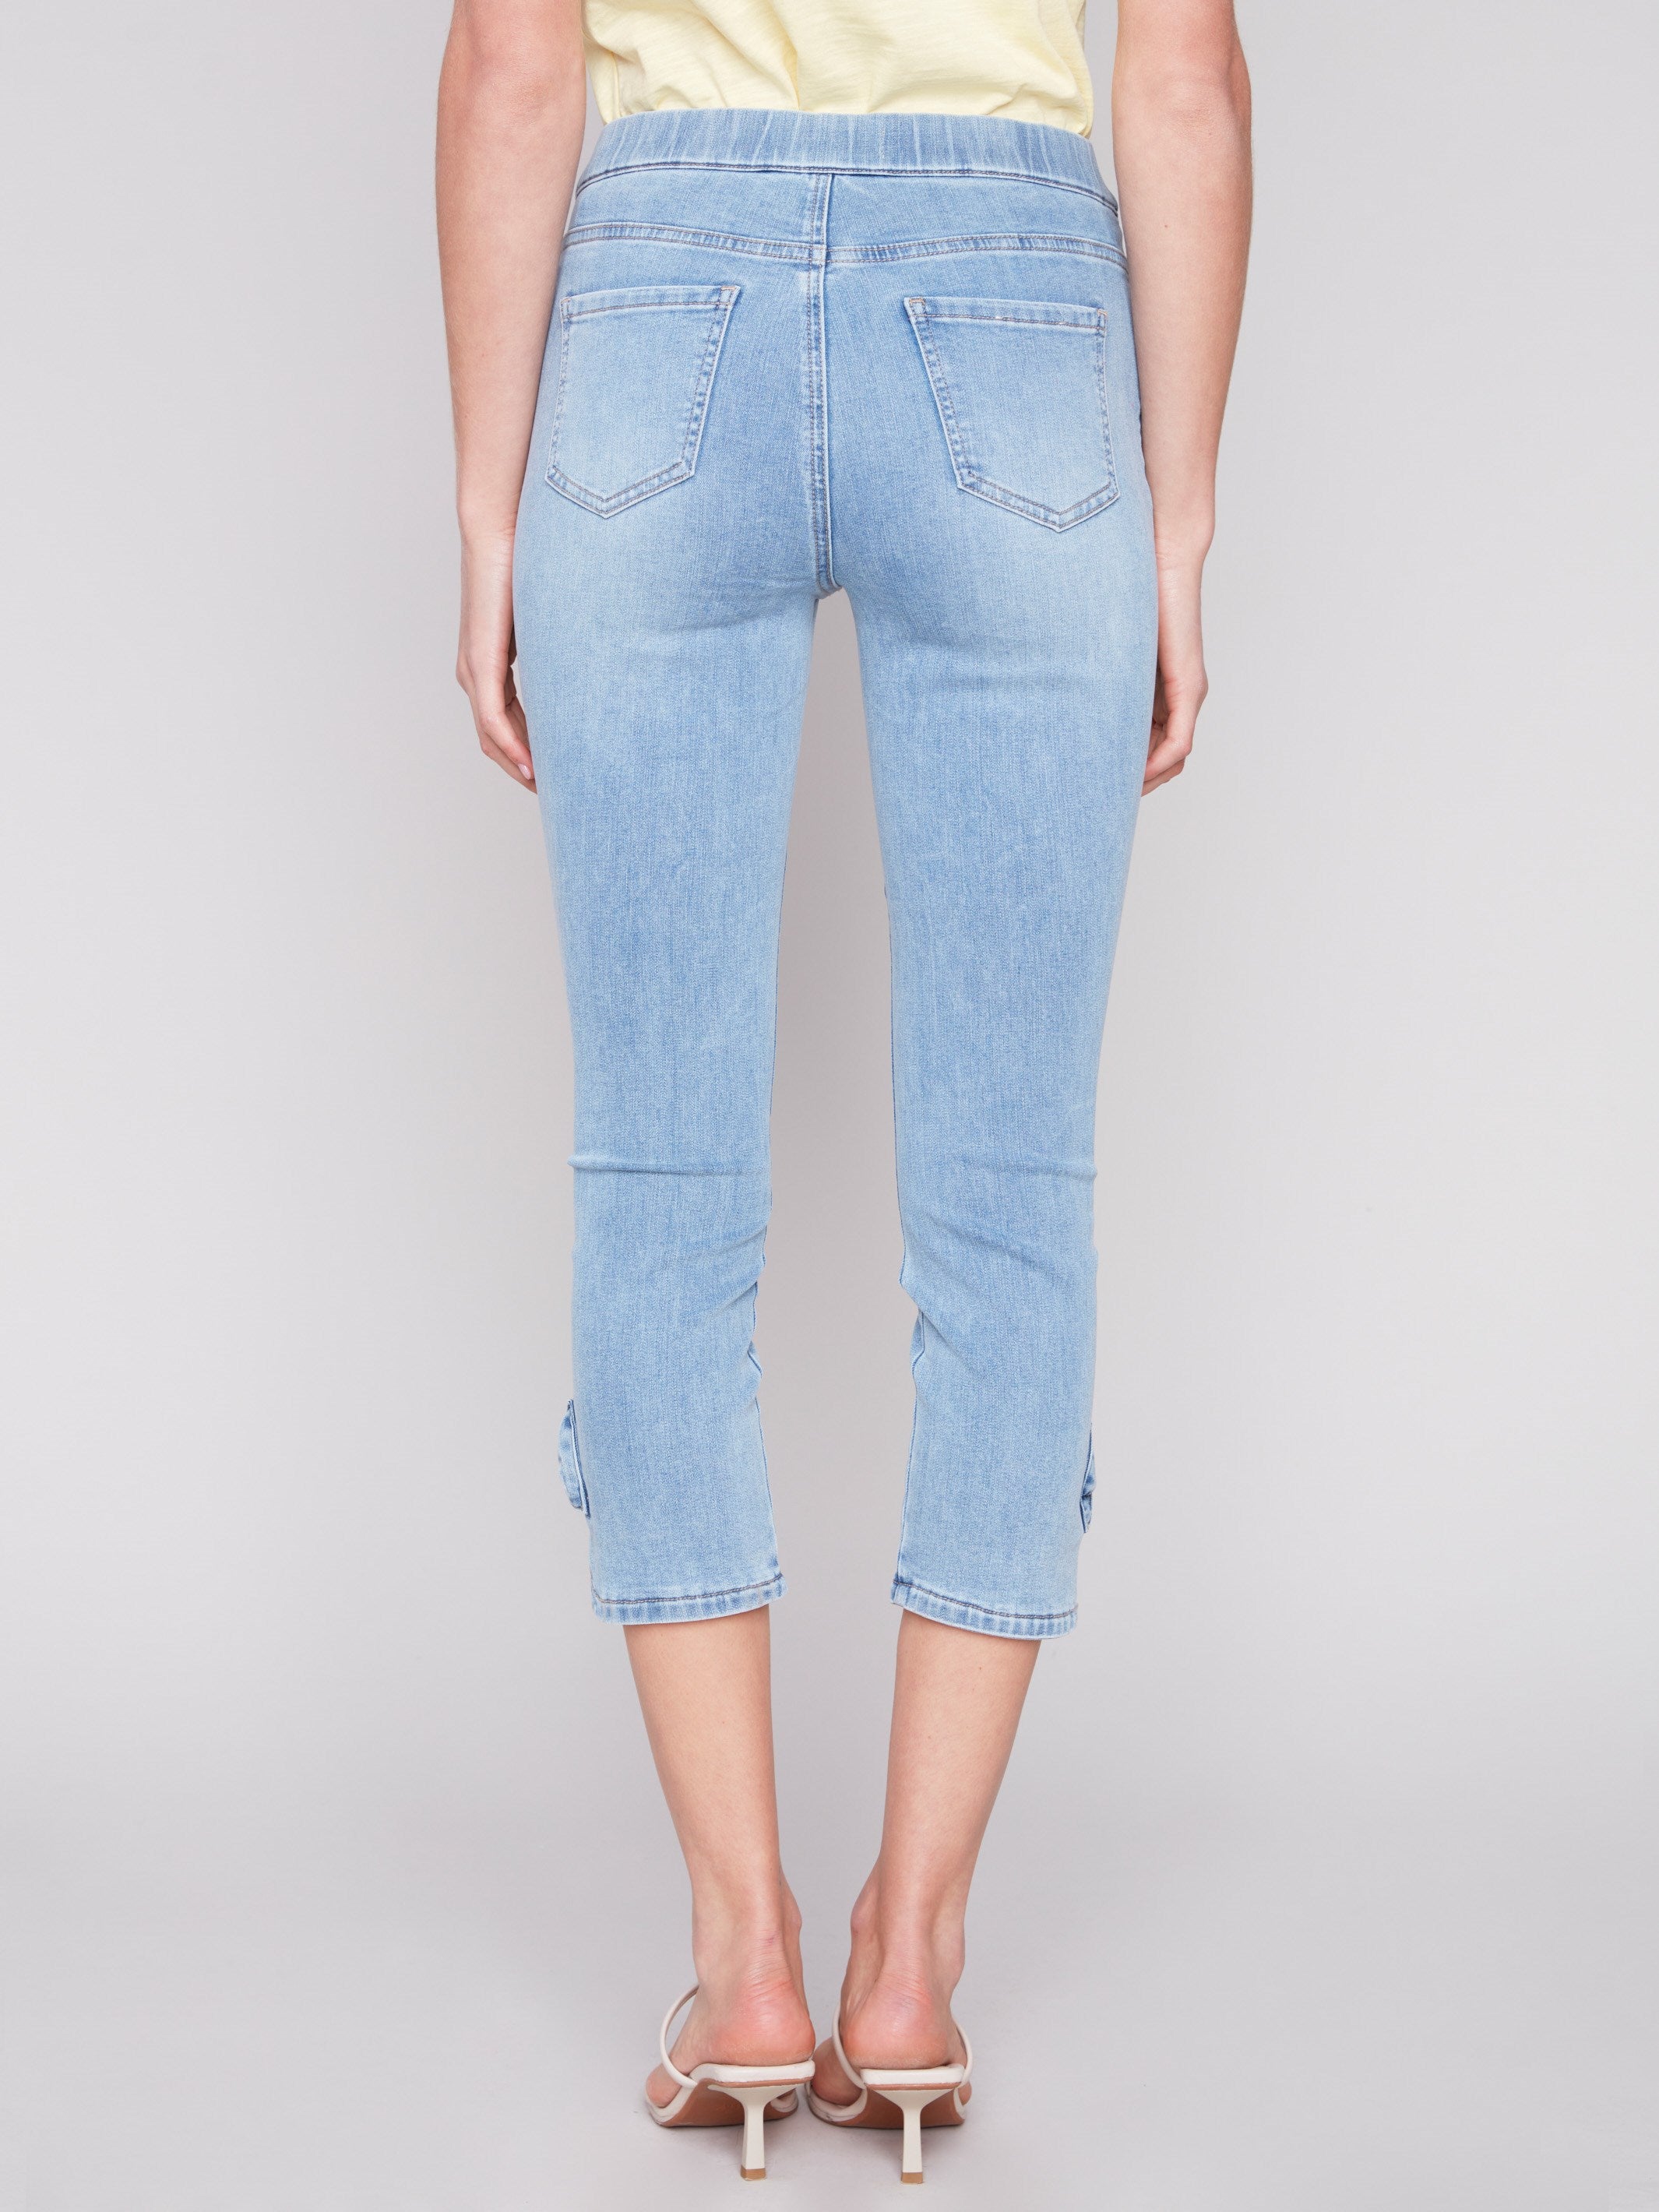 Pull-On Jeans with Bow Detail - Light Blue - Charlie B Collection Canada - Image 5